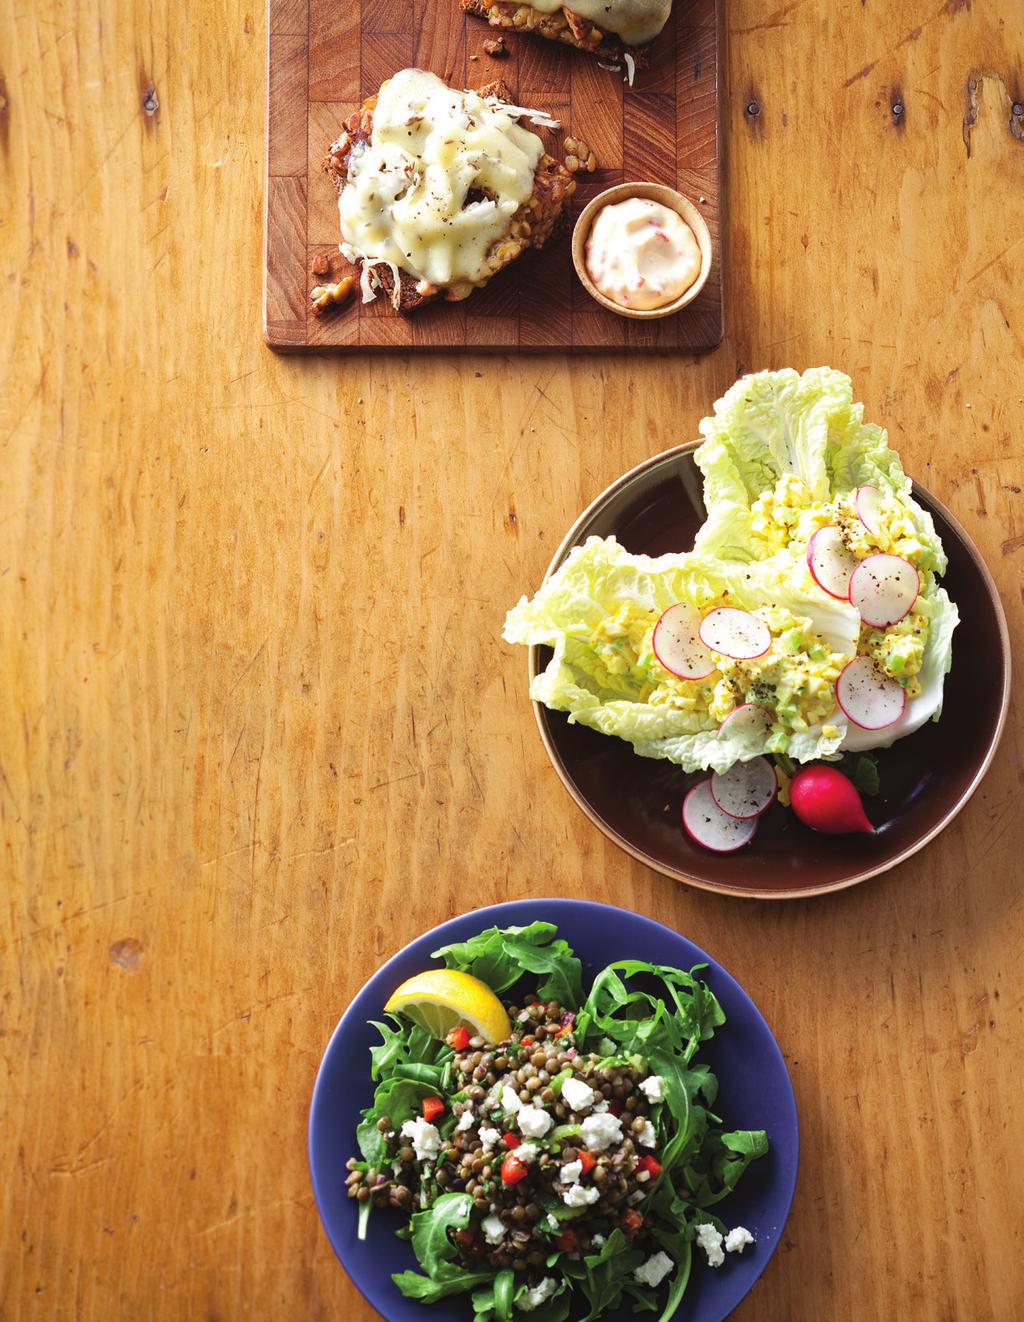 HEALTHY EATING Curried Egg Salad Lettuce Wraps Lunch Traditional egg salad gets jazzed up with curry powder. Try using romaine lettuce, leaf lettuce, or even raw kale instead of Napa cabbage.